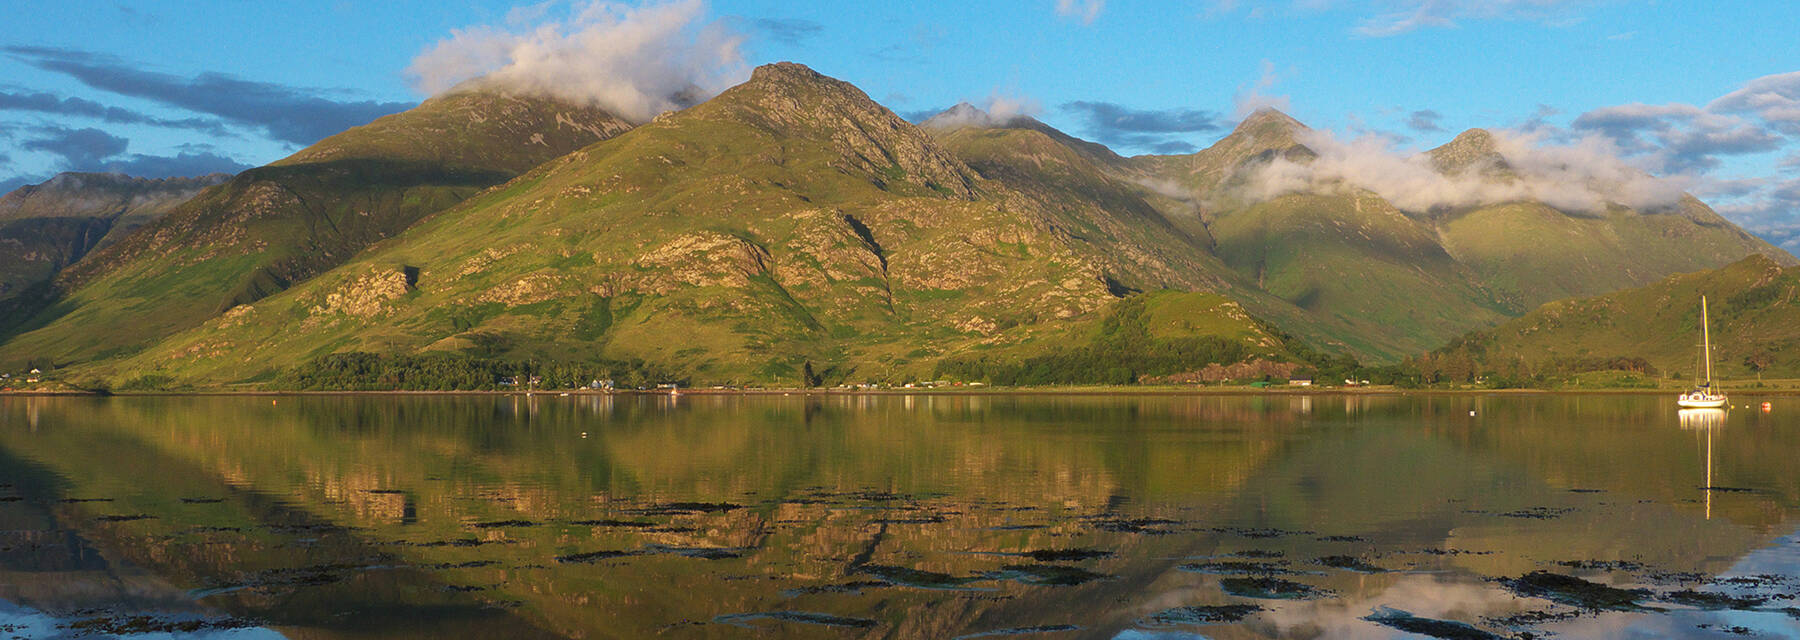 A clear reflection in Loch Duich beneath the iconic Five Sisters mountains of Kintail